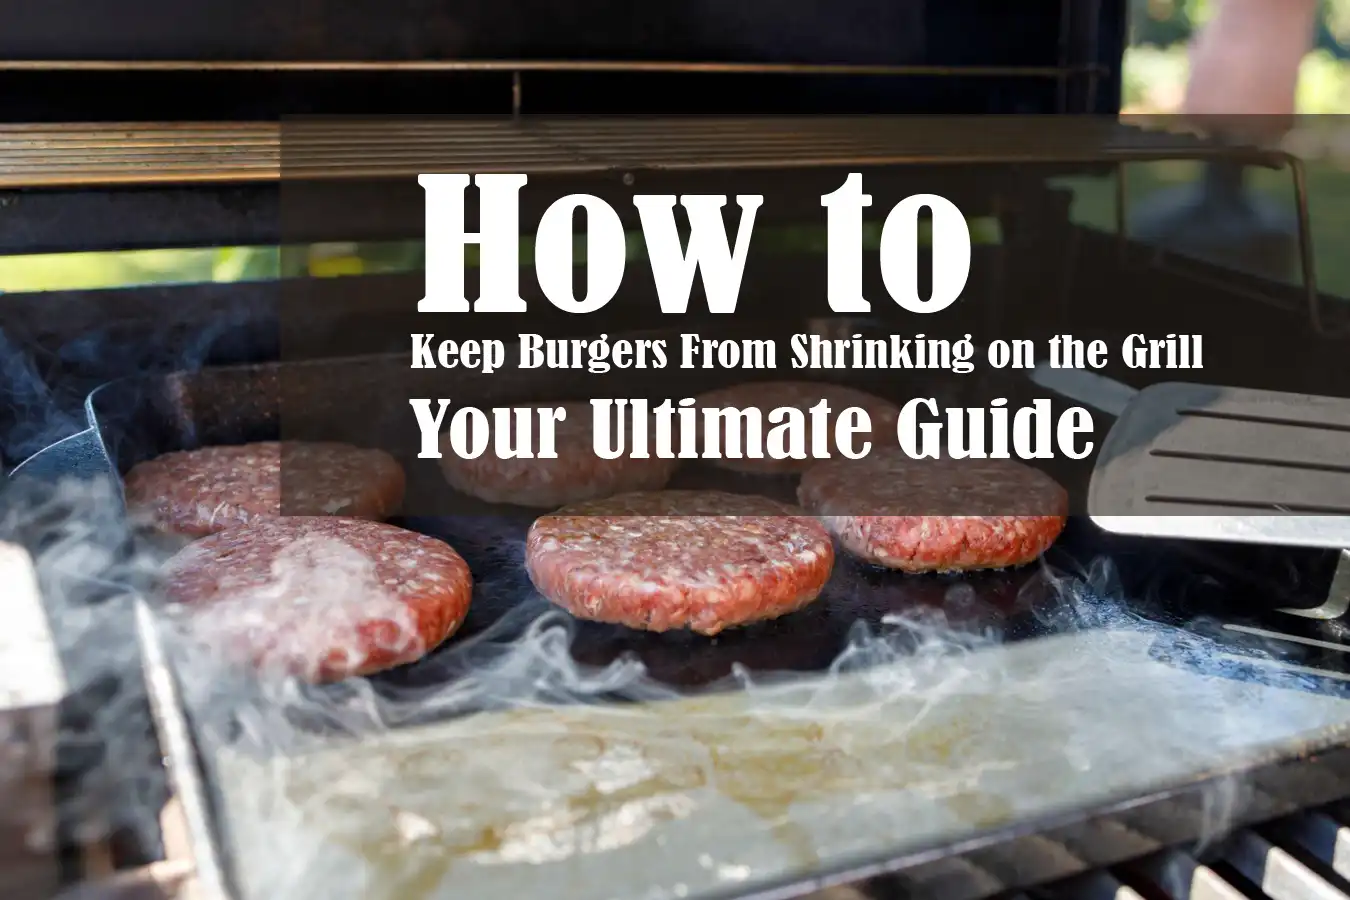 How to Keep Burgers From Shrinking on the Grill